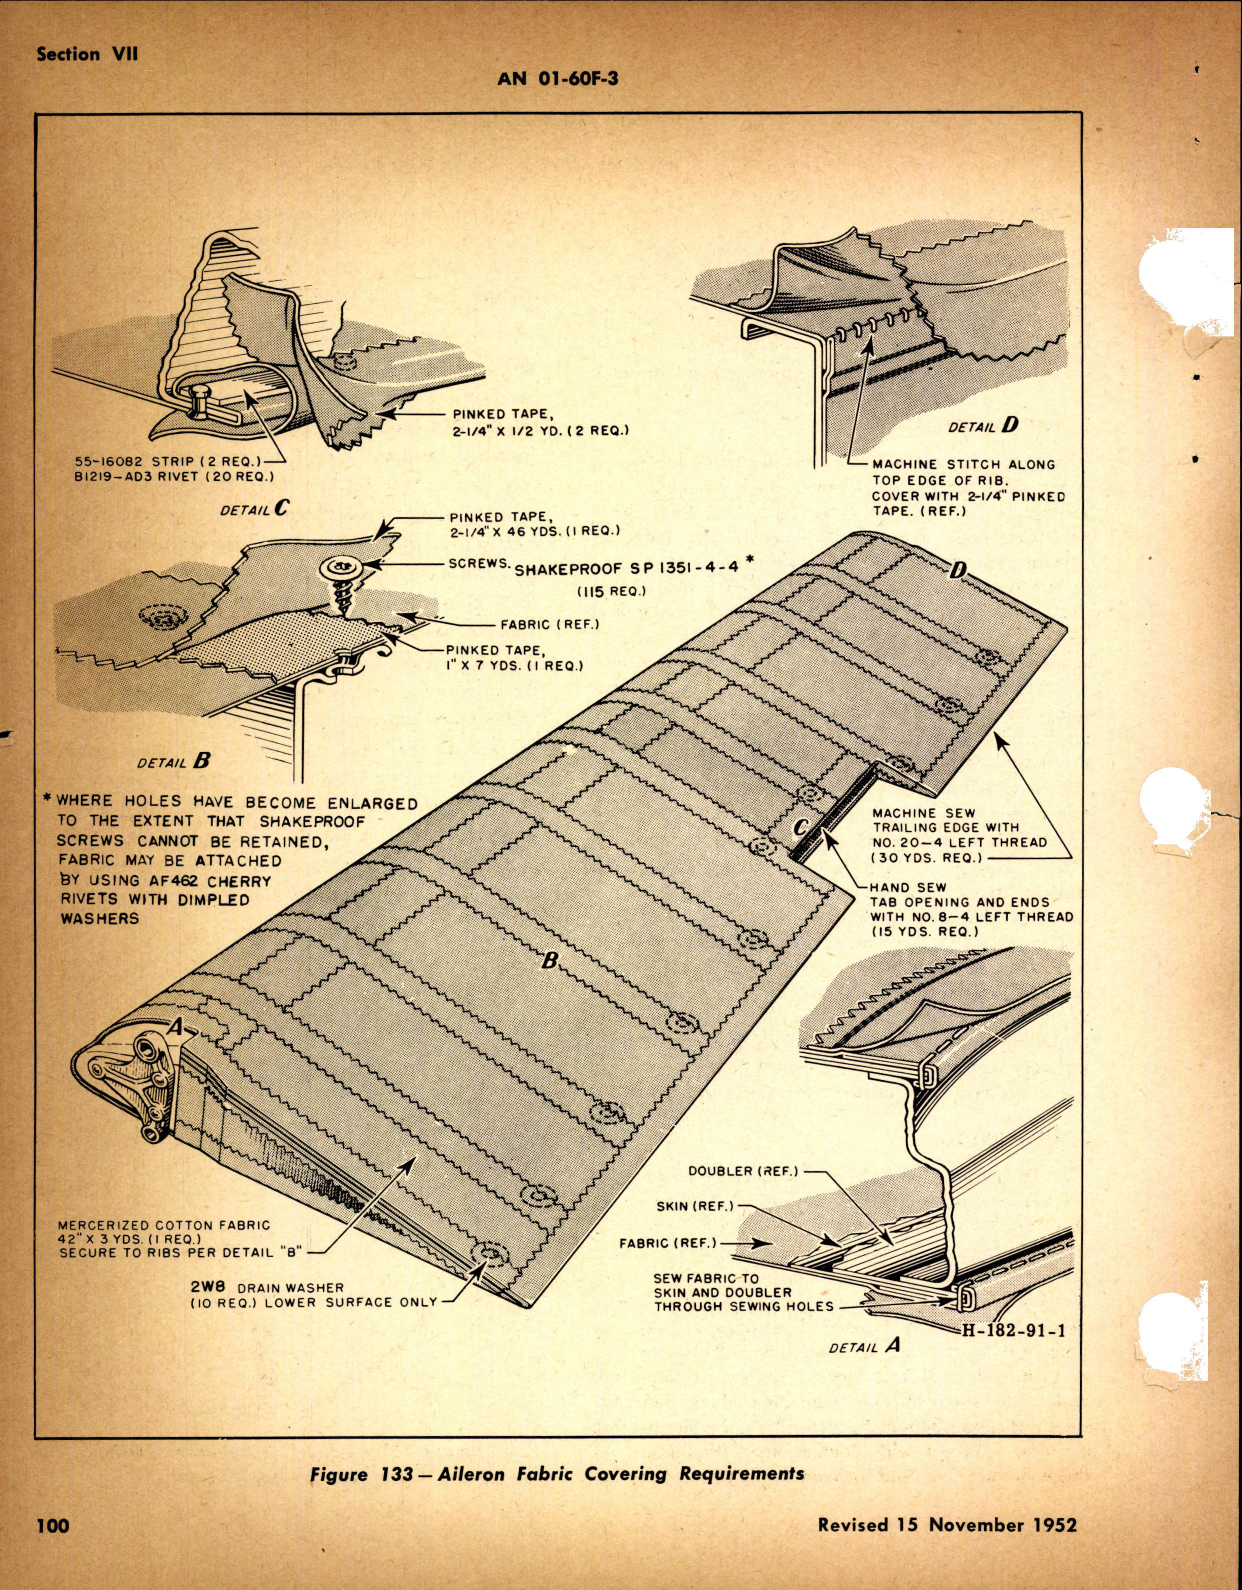 Sample page 4 from AirCorps Library document: Handbook Structural Repair Instructions for T-6